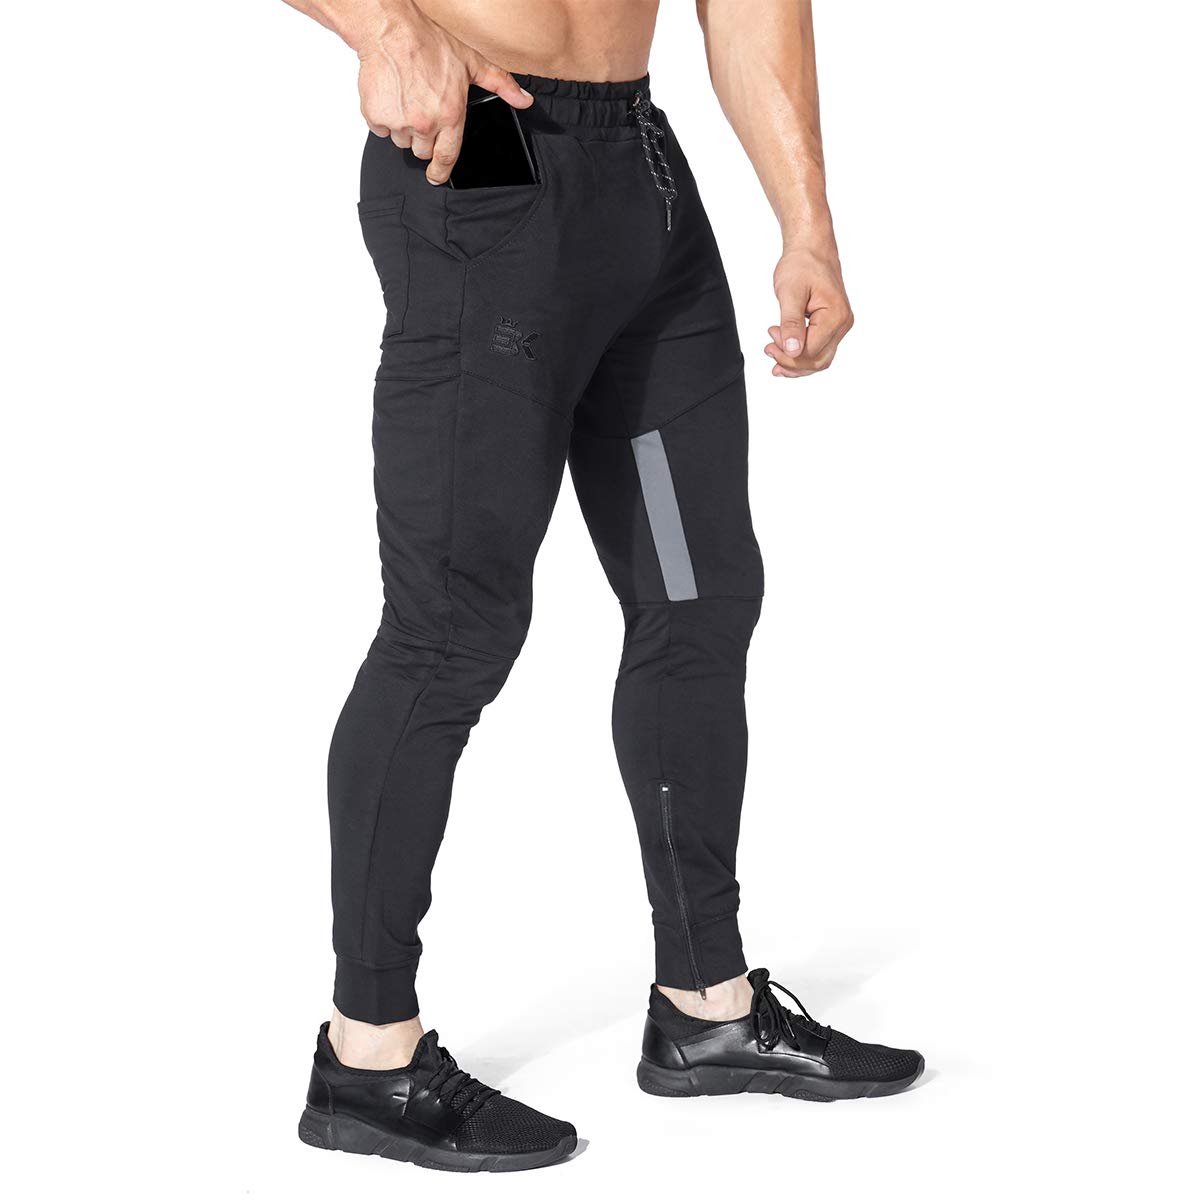 EQVAL Slim fit Lightweight Track Pants for Men, Joggers Gym Pants,Workout  Weightlifting Casual Running Trackpants with… - Shop online at low price  for EQVAL Slim fit Lightweight Track Pants for Men, Joggers